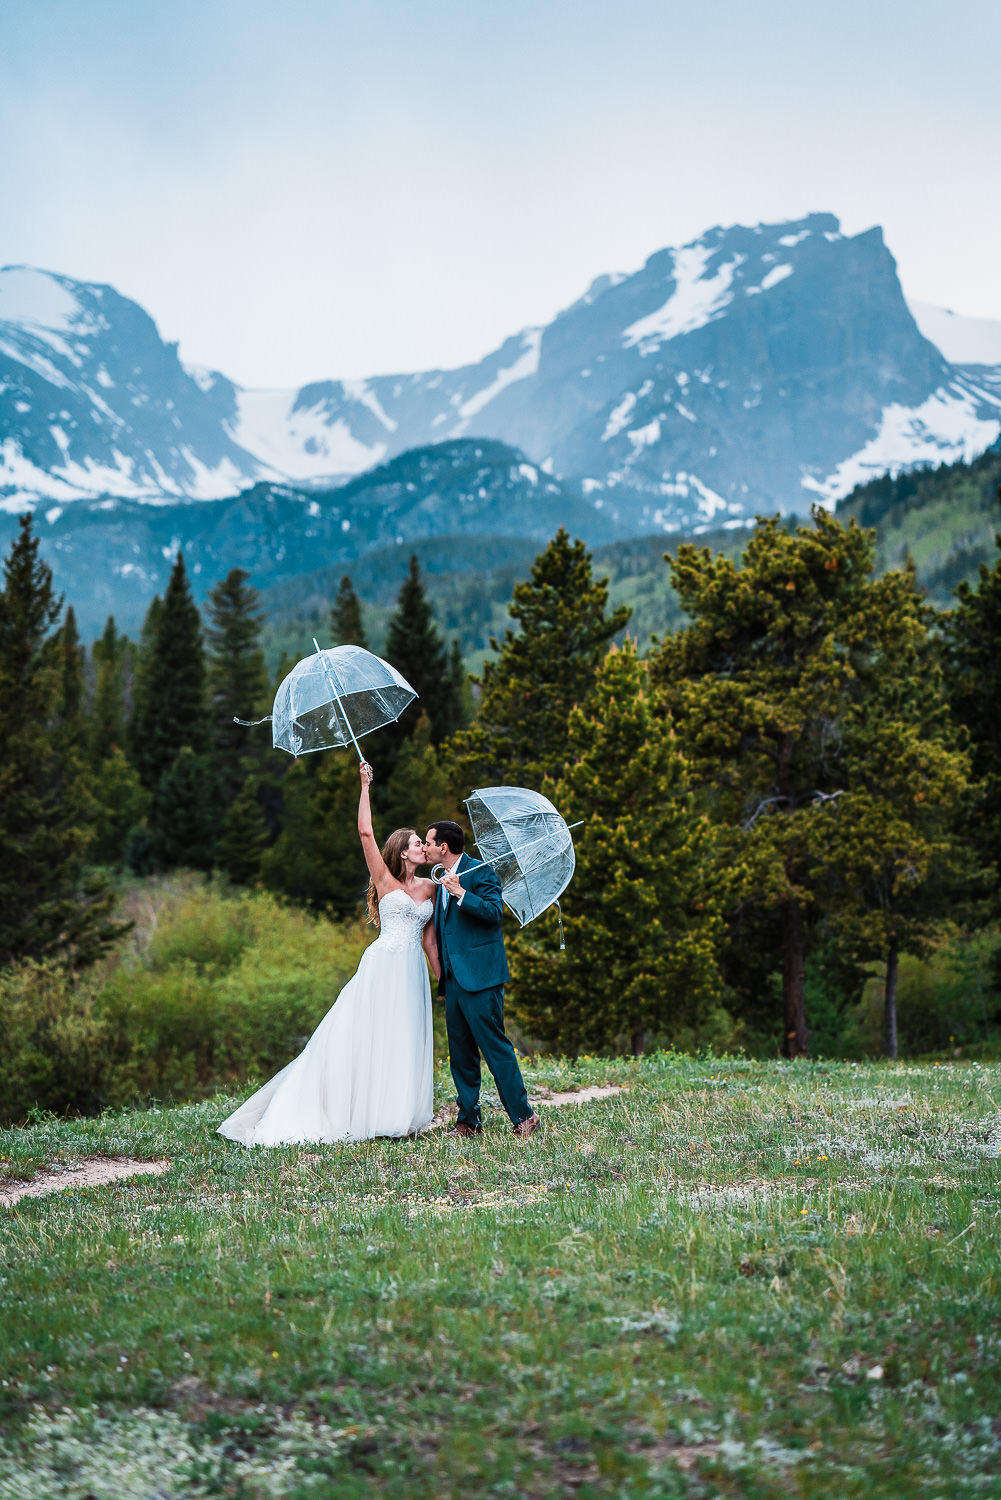 a bride and groom kiss holding umbrellas with mountains and trees behind them